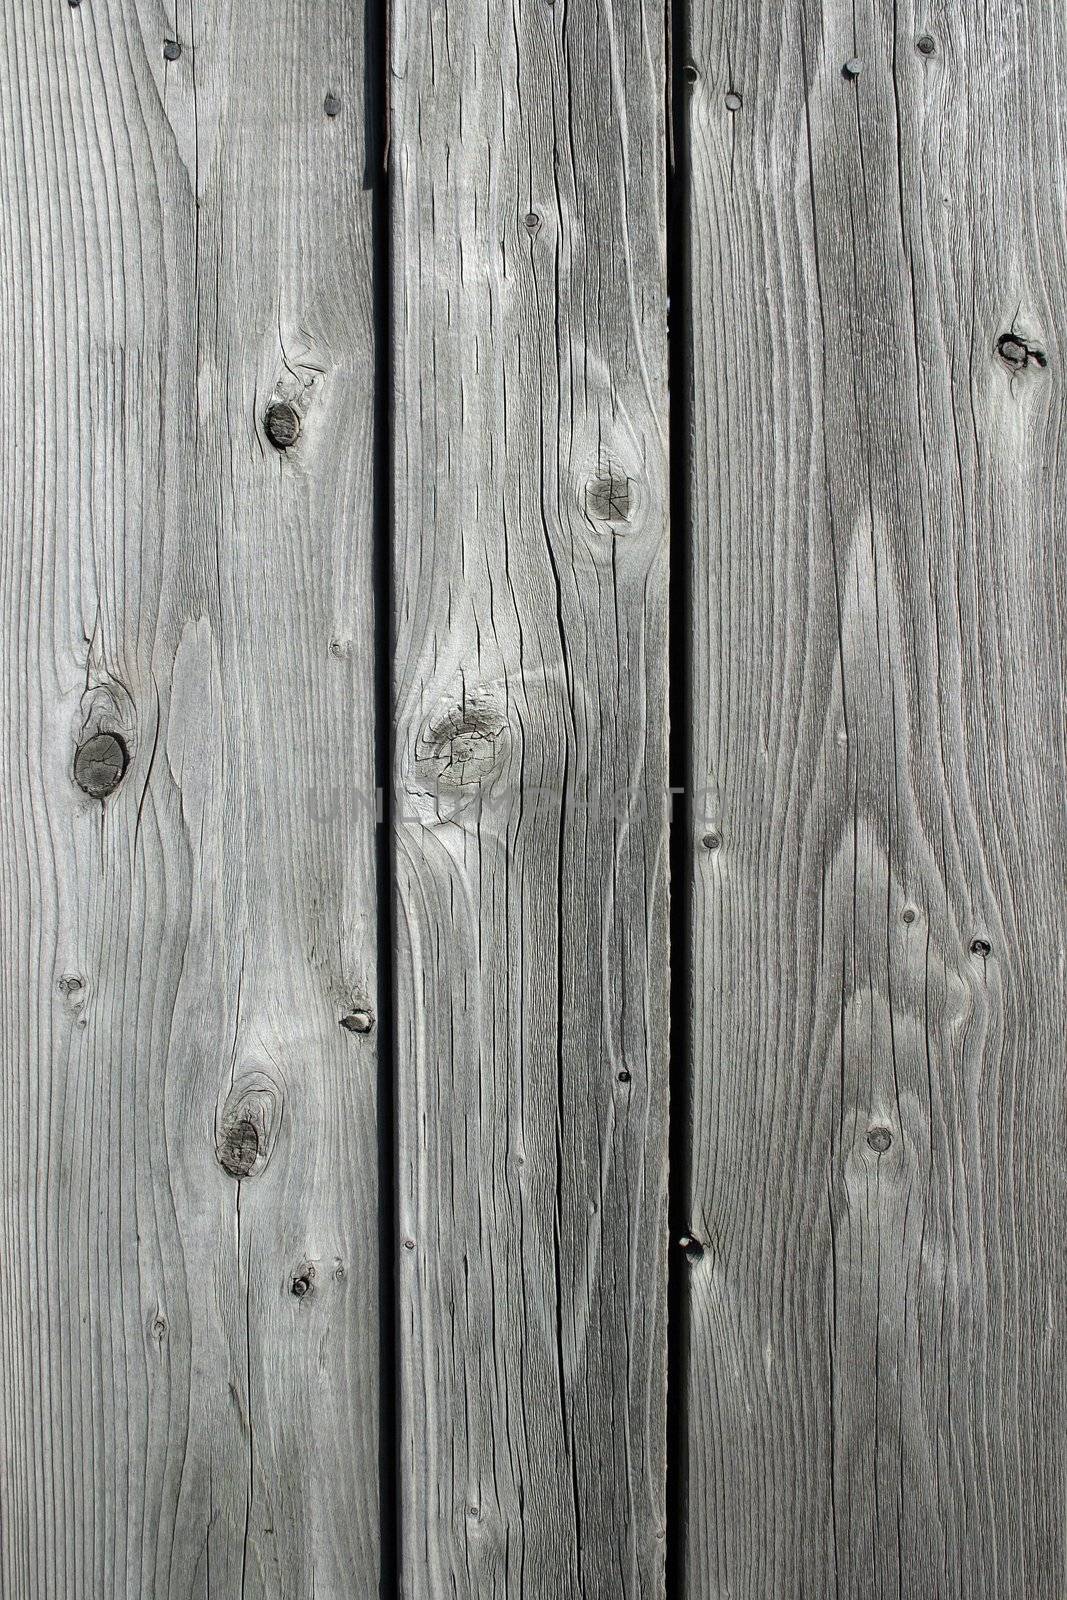 Unpainted wooden planks. Knotty wood texture background.